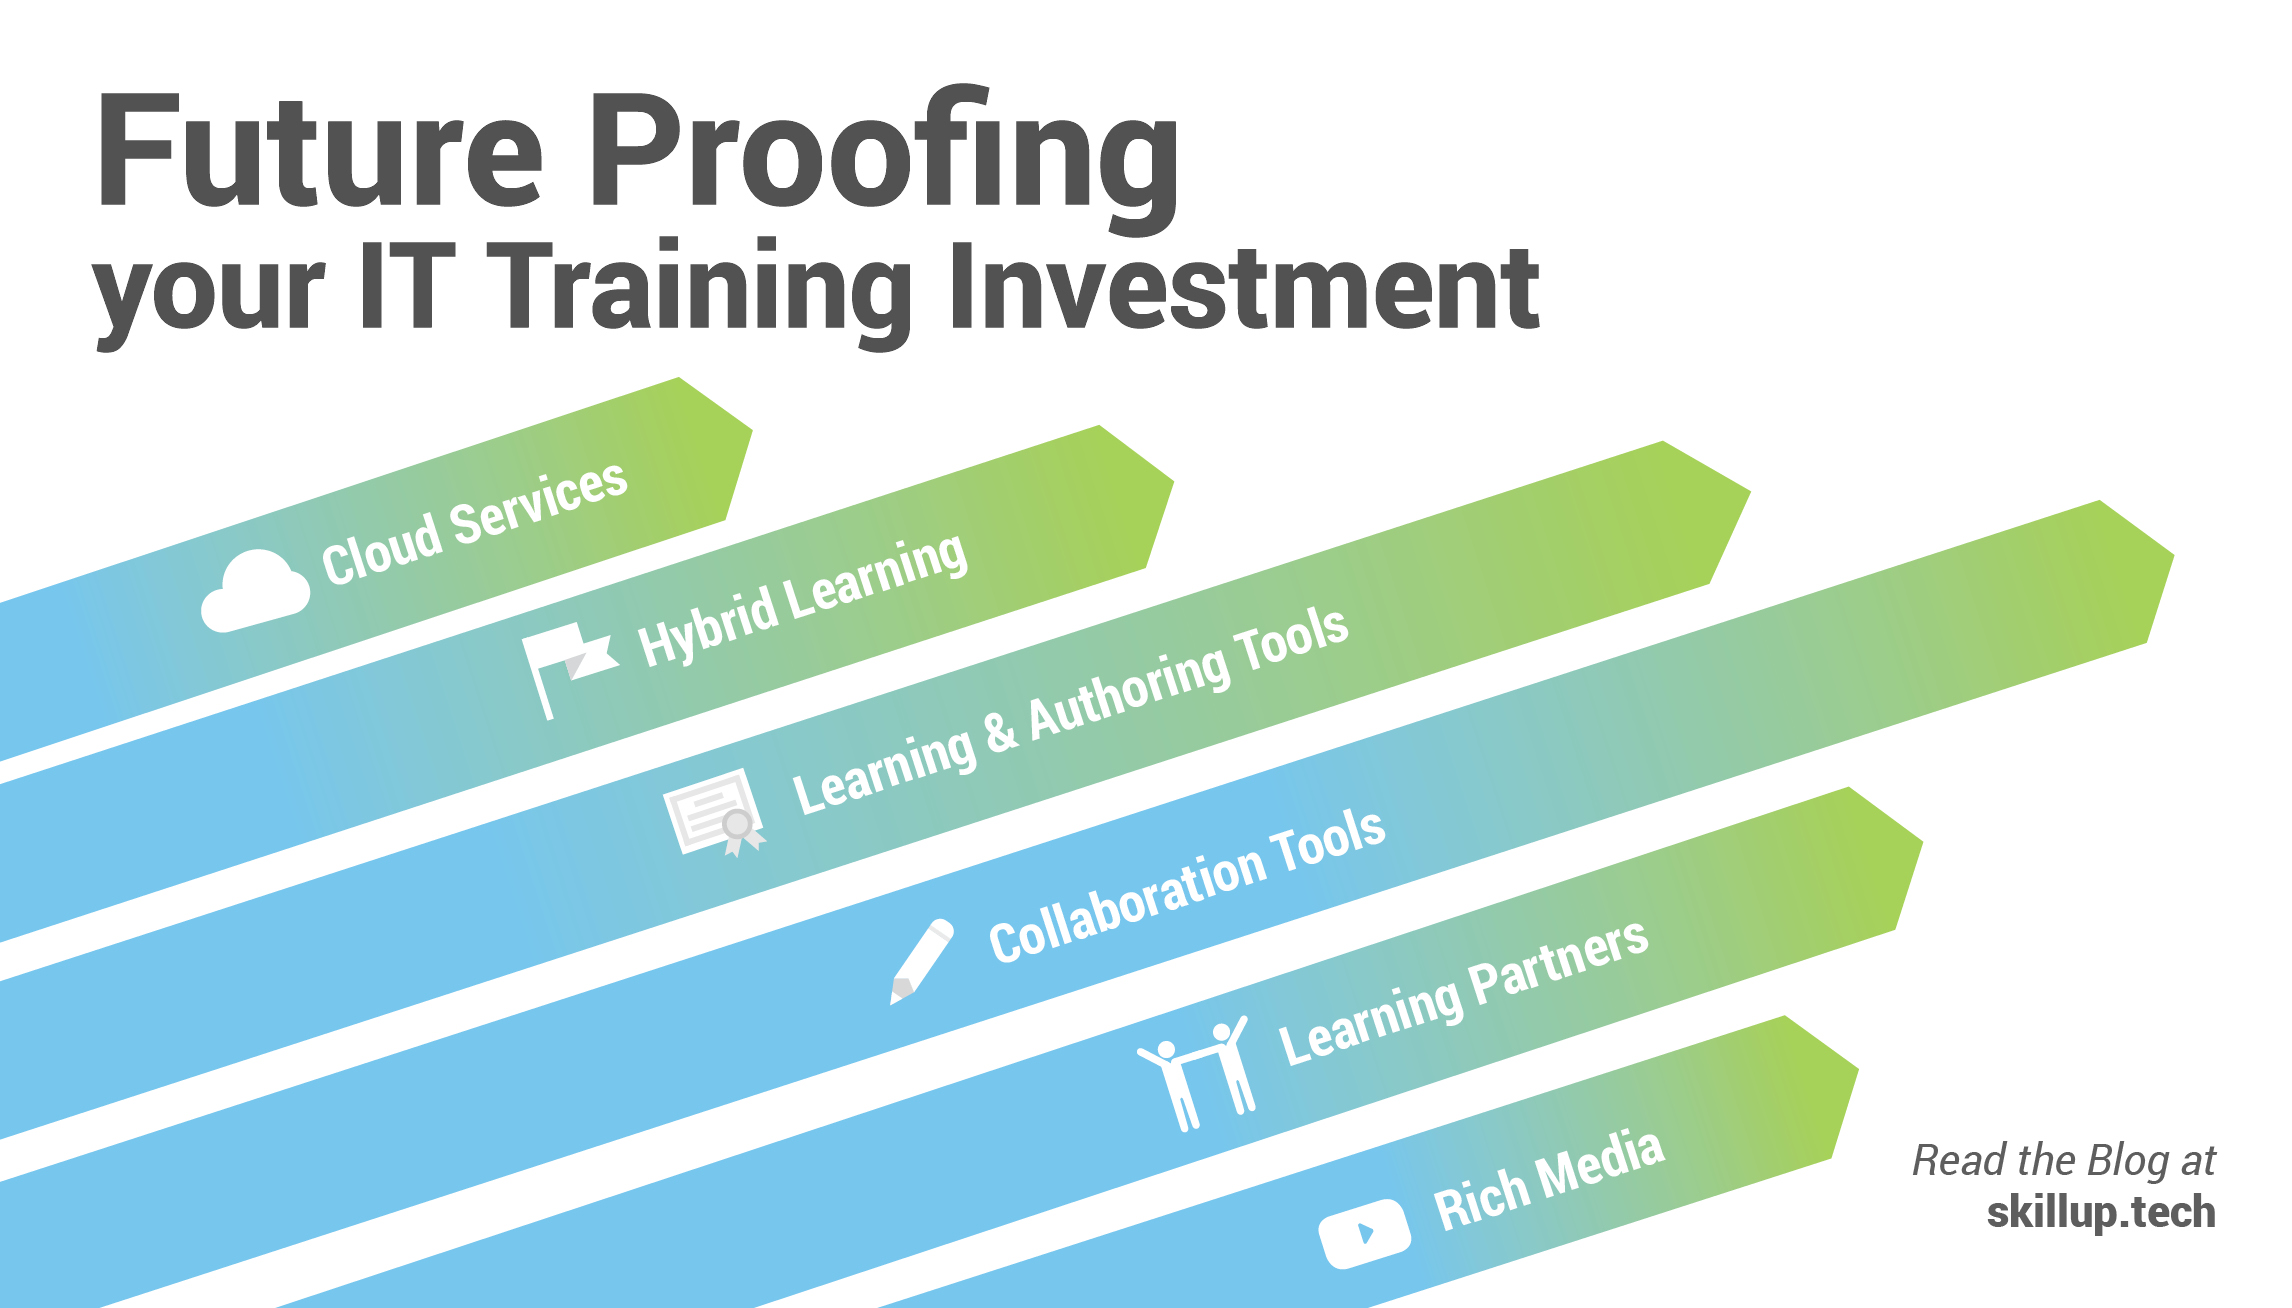 Infographic of IT Training Investment Tools and Practices